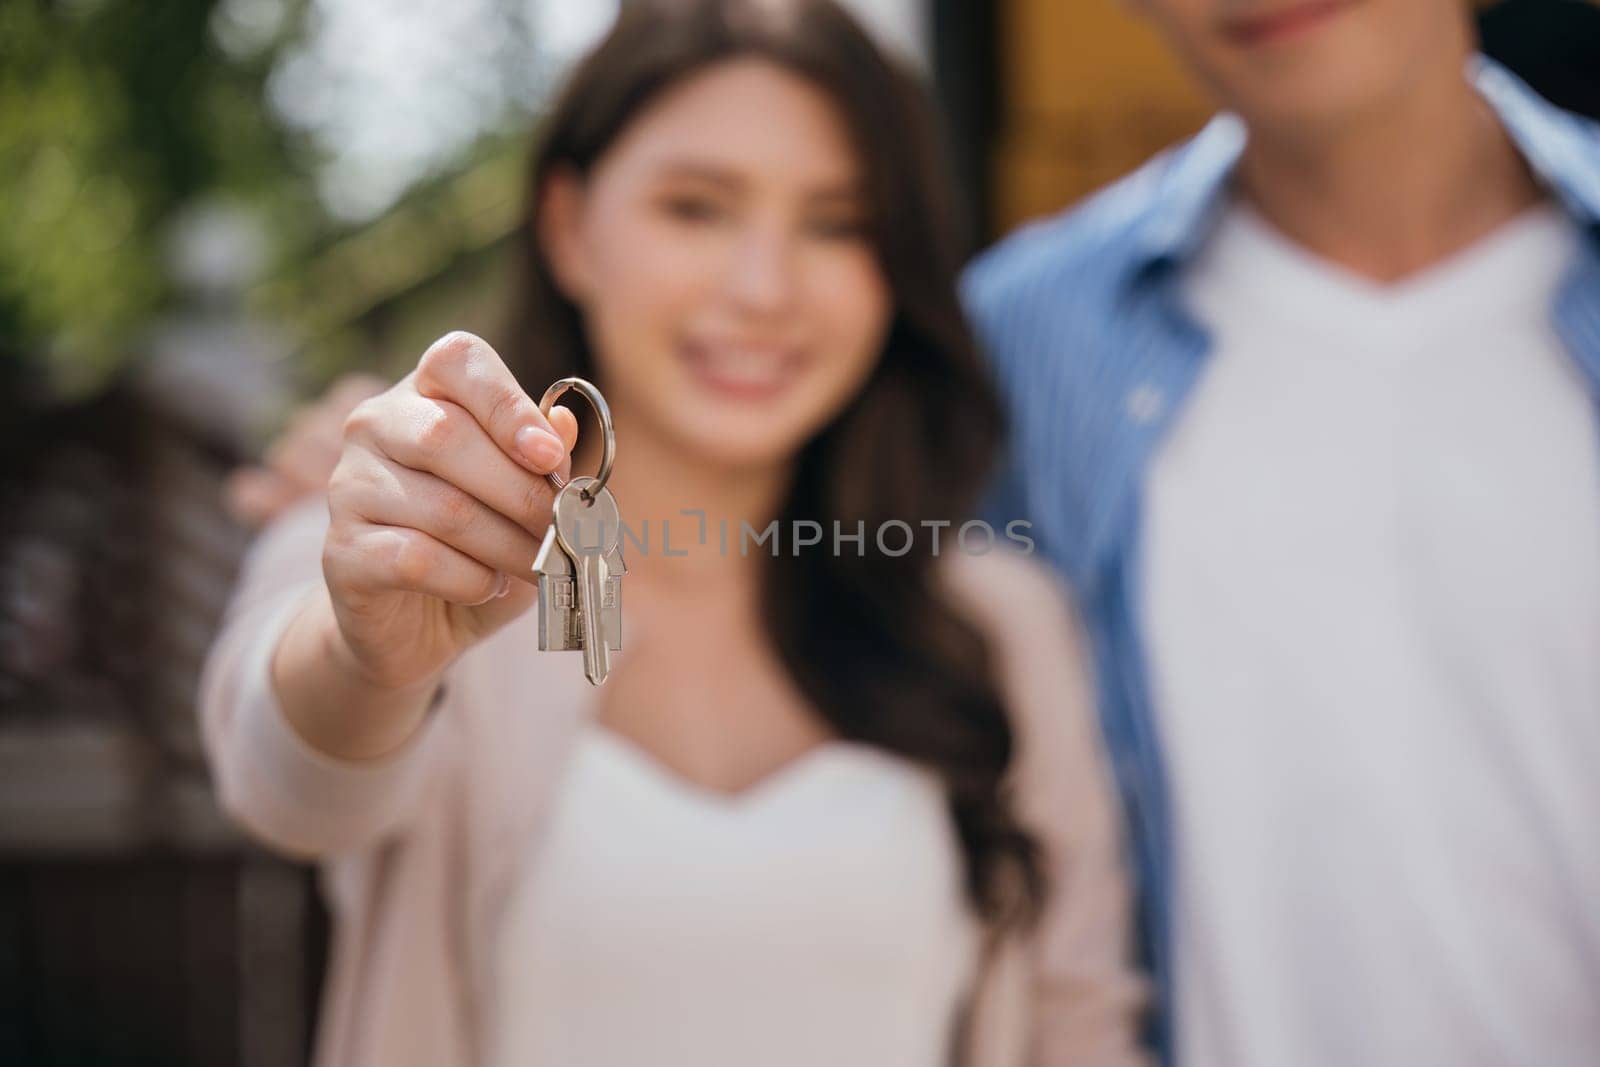 In real estate and moving a couple's success is shown by keys carrying a mattress. Their happiness signifies the joy of a successful relocation. Moving Day Concept by Sorapop